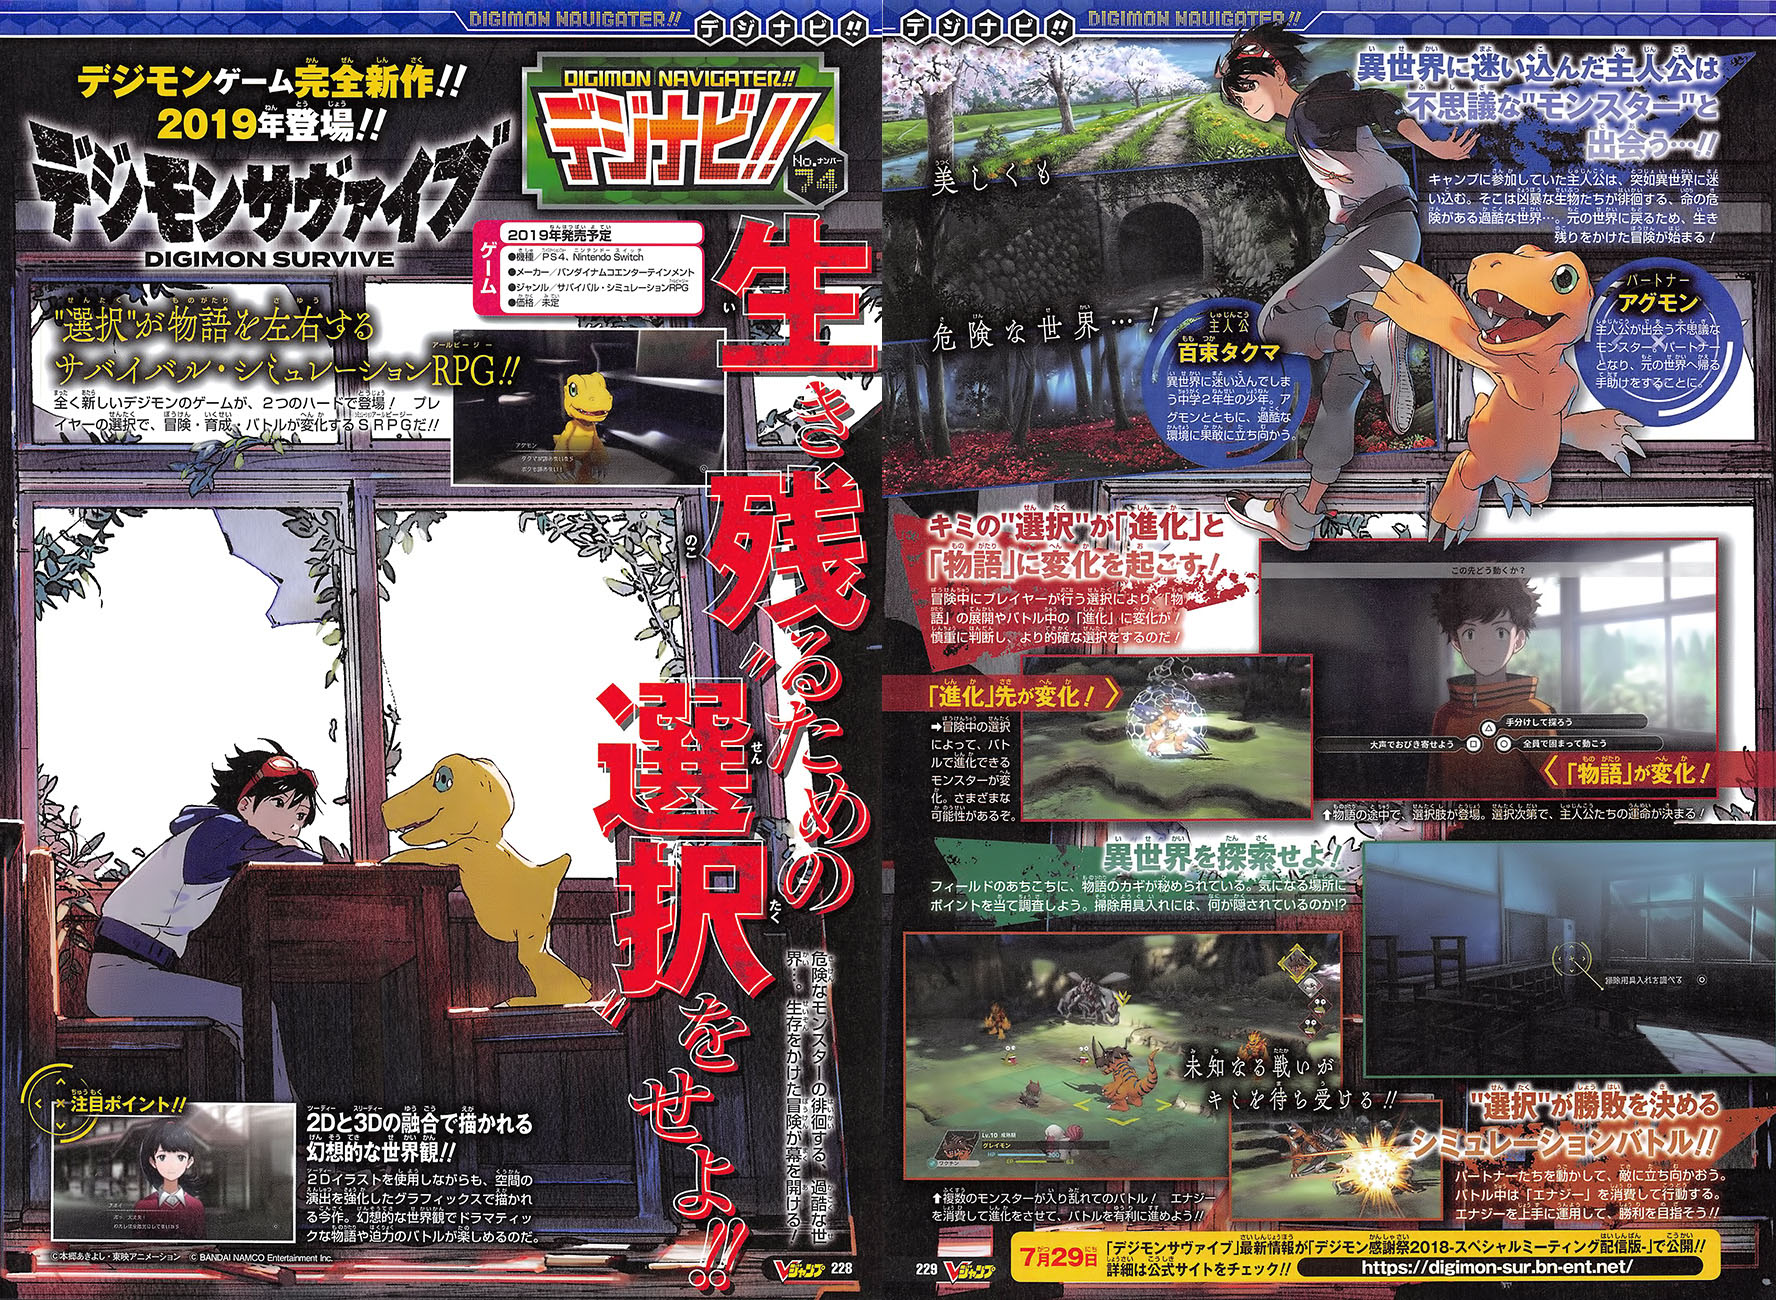 First scan of upcoming title Digimon Survive from Weekly Shōnen Jump magazine.